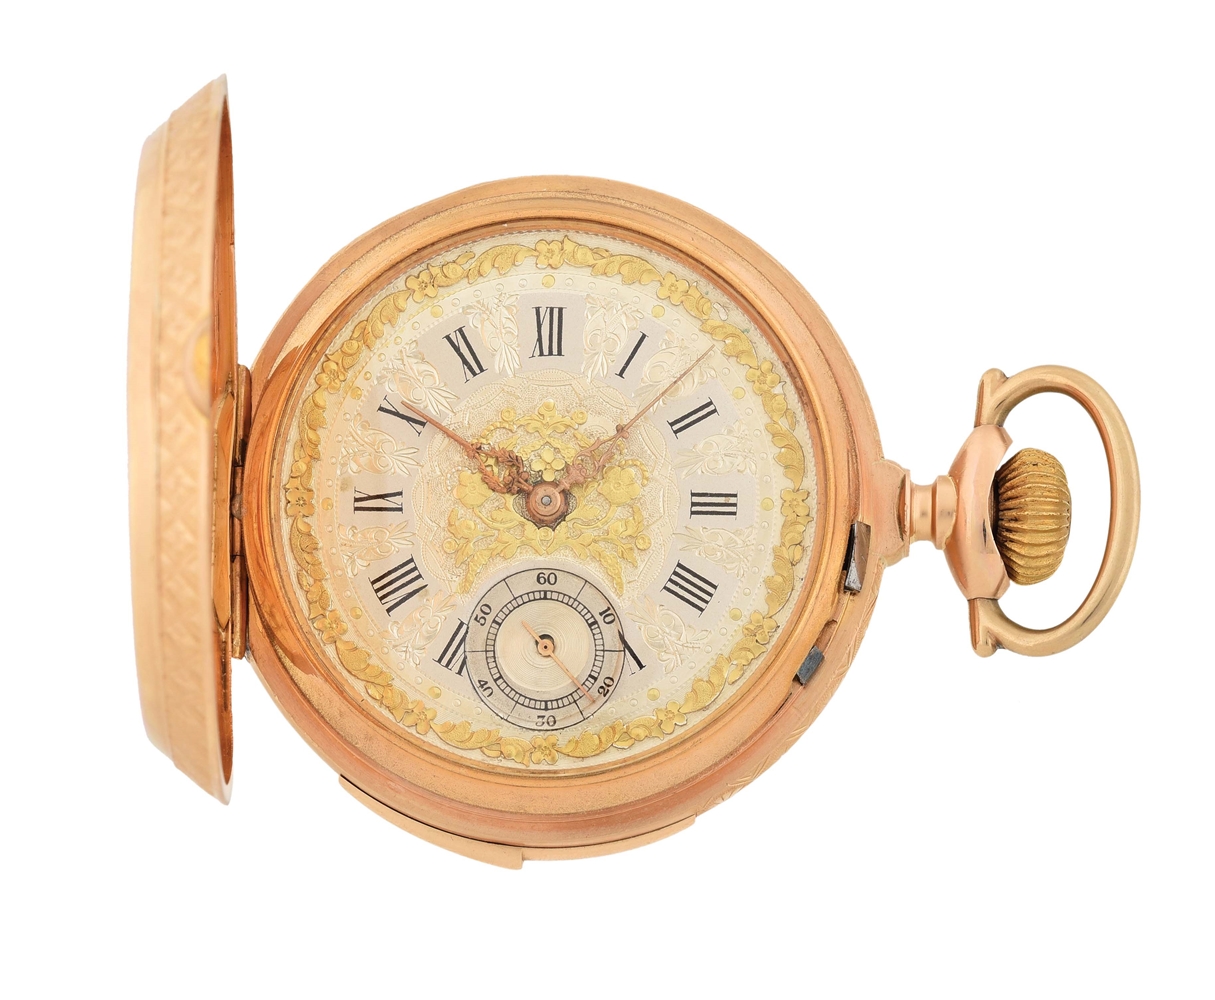 18K YELLOW GOLD MONTANDON SWISS MINUTE REPEATING H/C POCKET WATCH